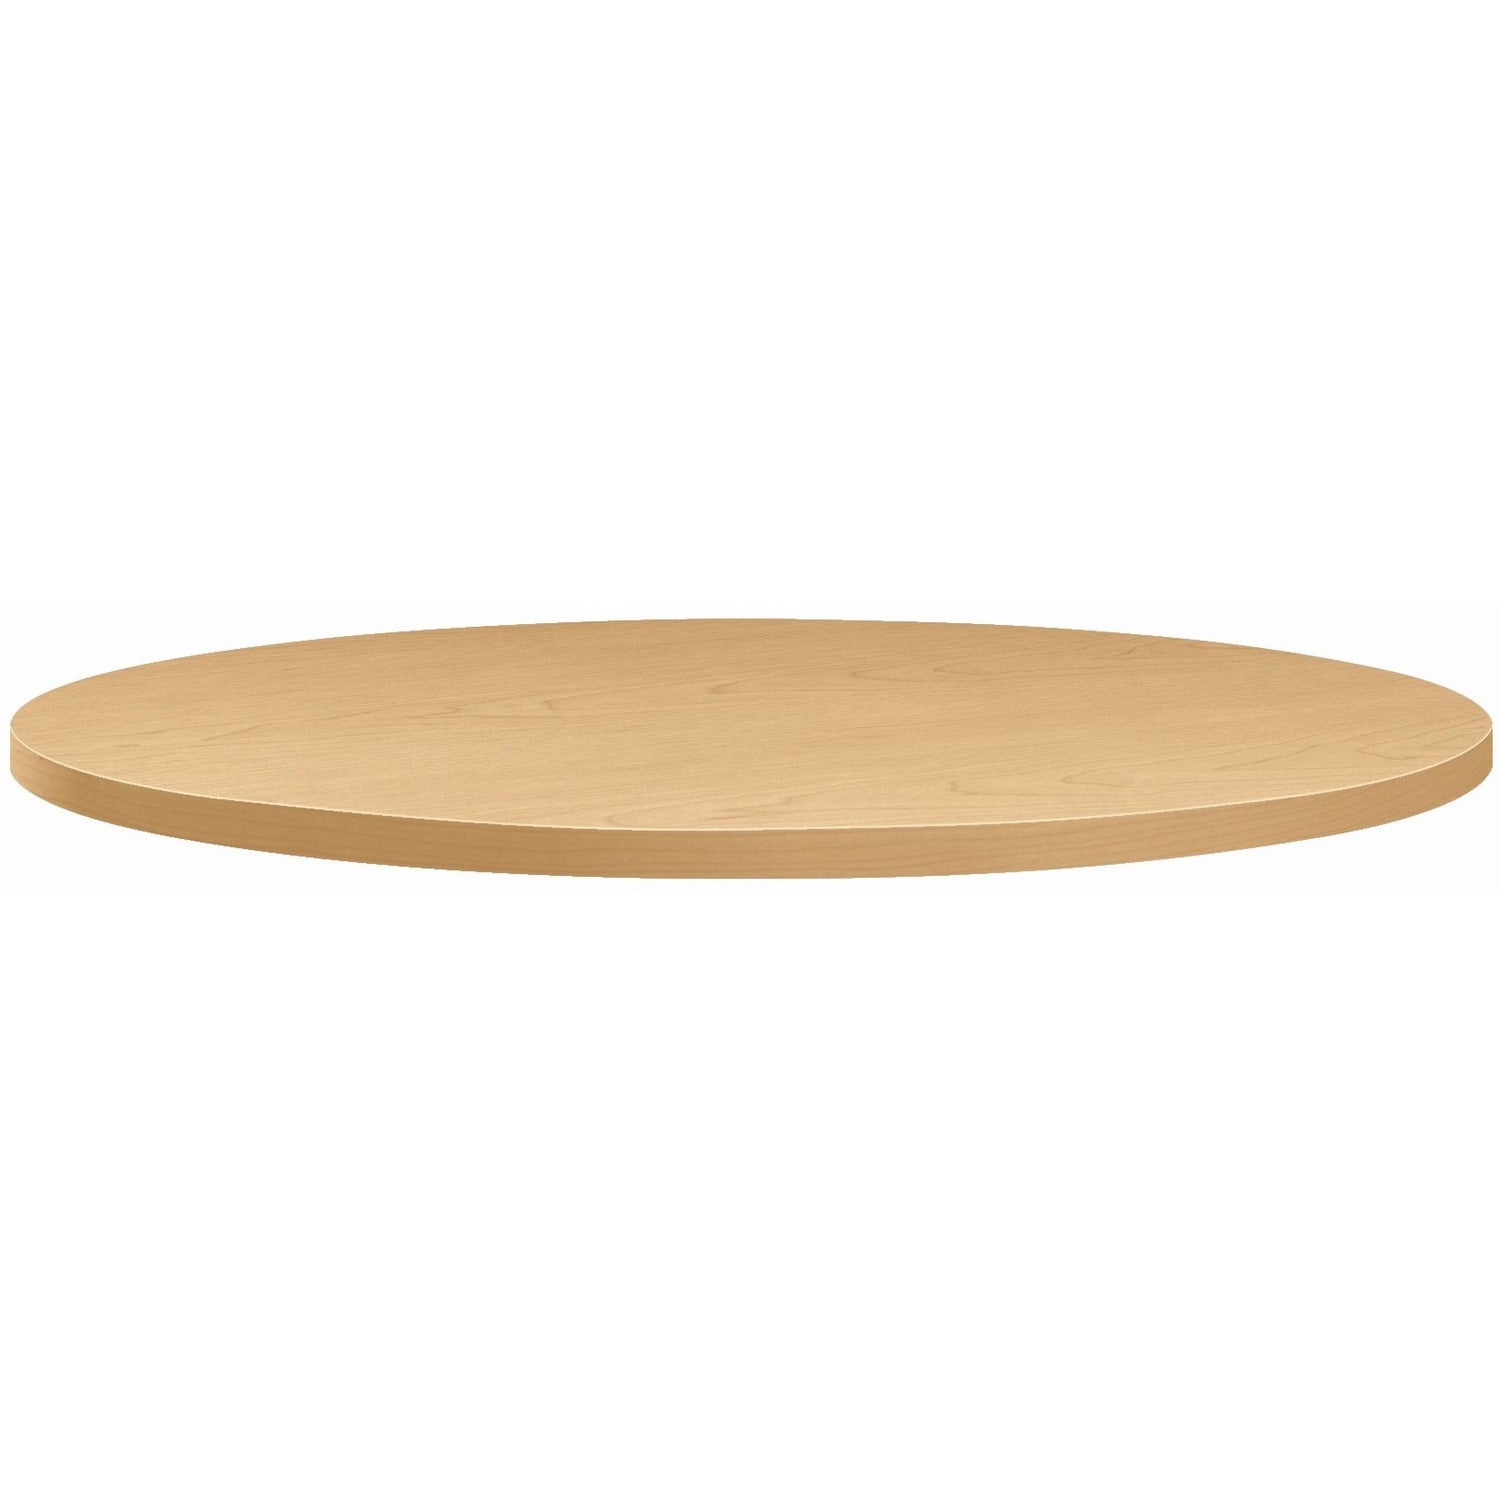 hon-between-hbttrnd42-table-top-for-table-topround-top-natural-maple_honbtrnd42ndd - 1